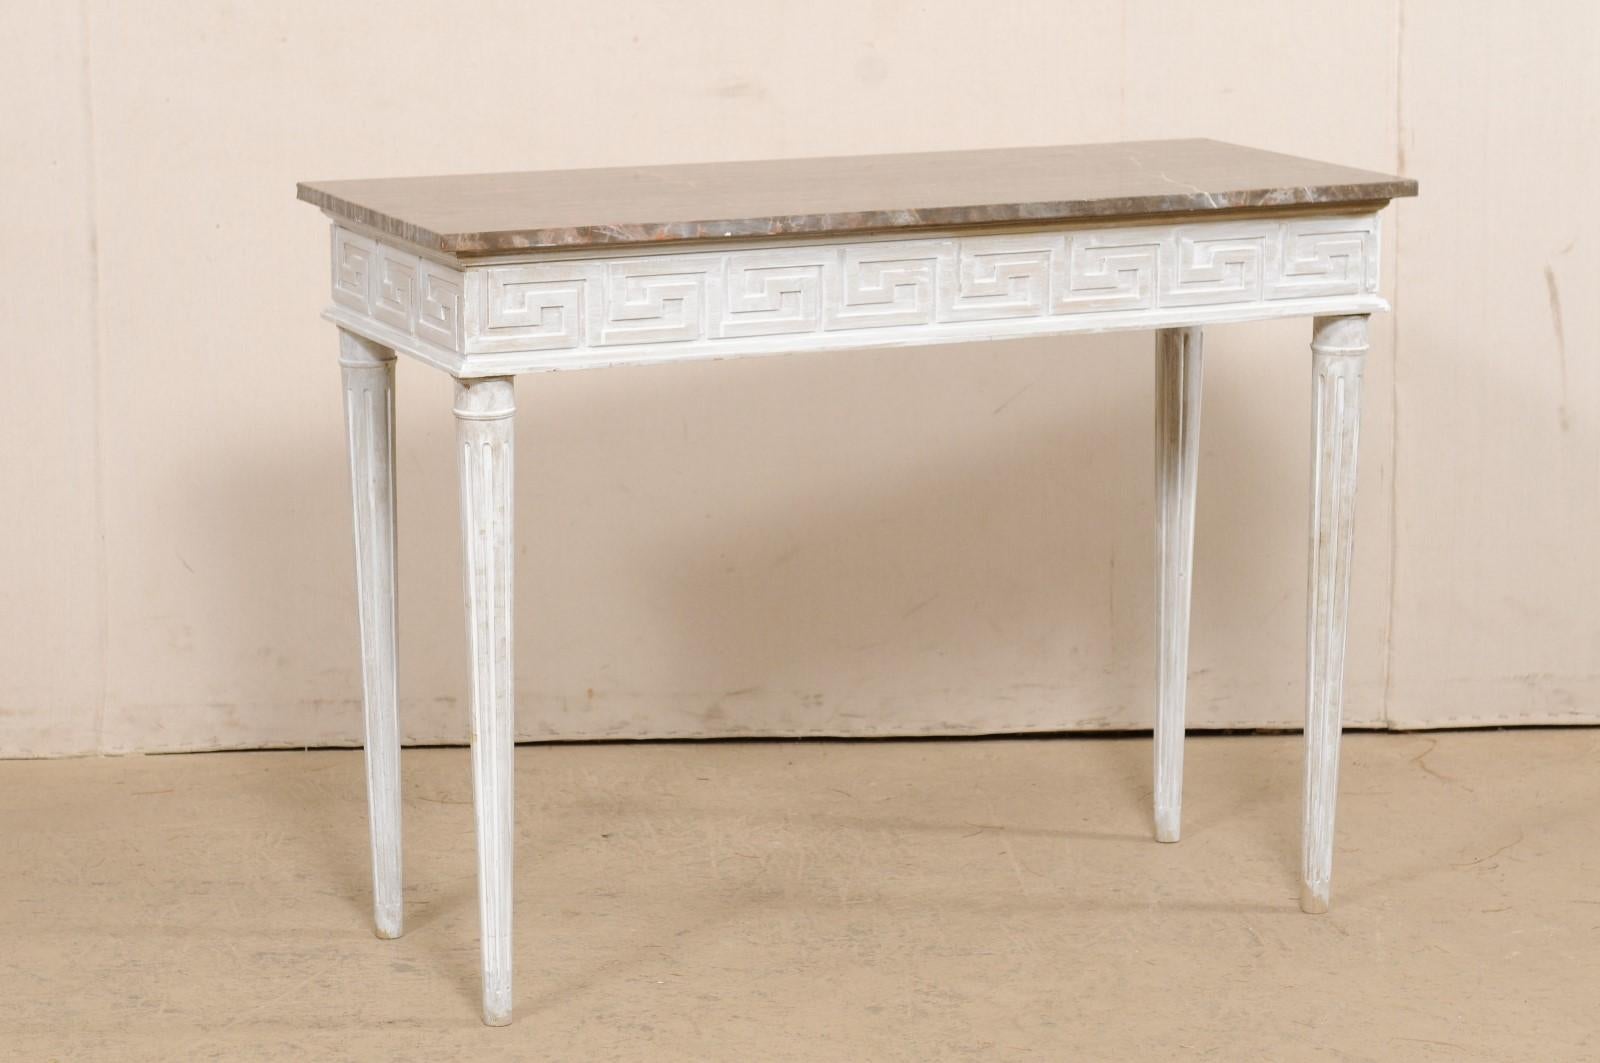 An American marble top console table in Greek key motif. This vintage American console table has a rectangular-shaped marble top which rests upon a skirt with is carved in a Greek key pattern, which continues on all four sides of the table, making